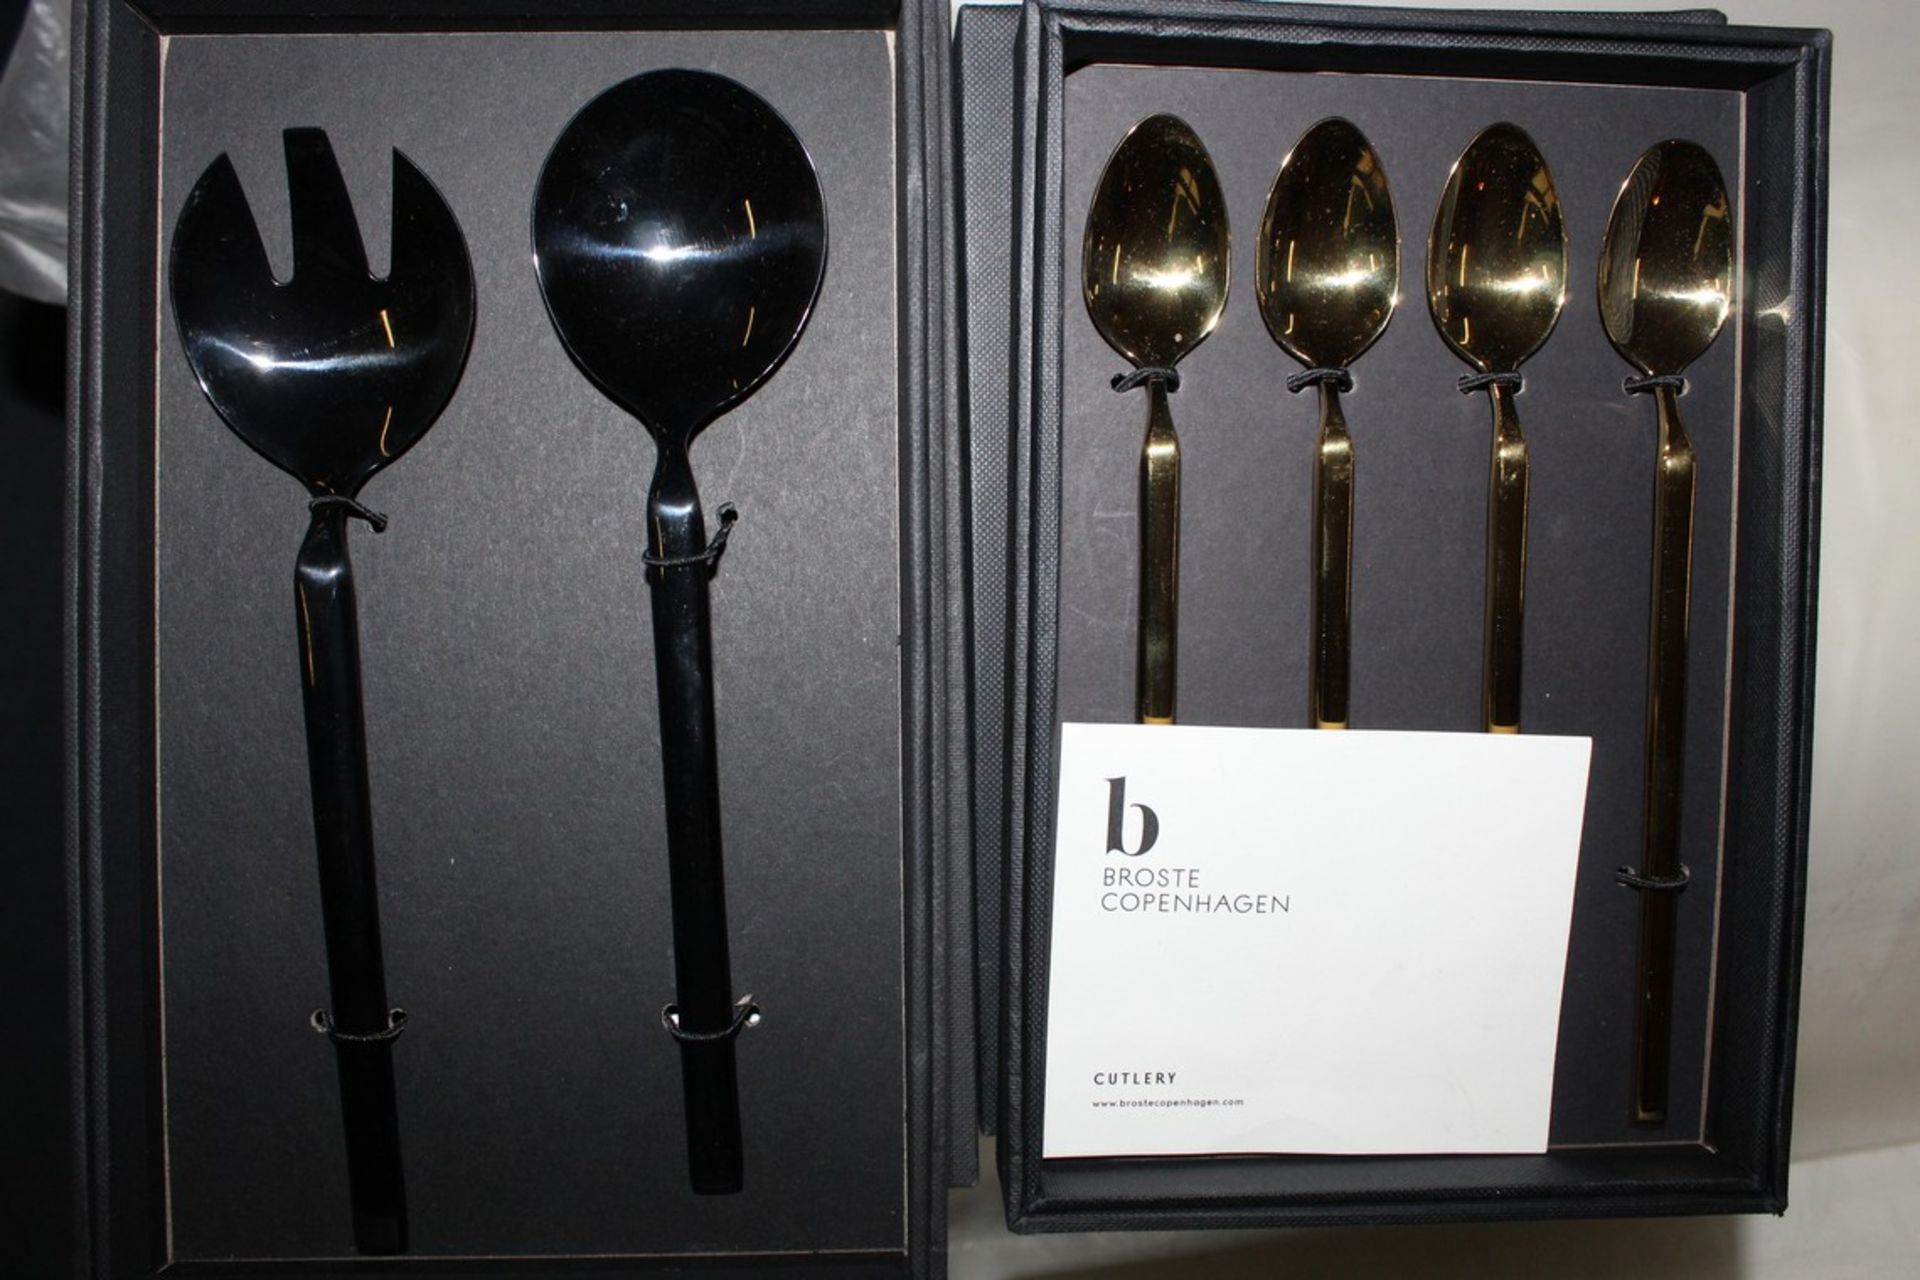 Assorted Broste Copenhagen Long Spoon Sets and Salad Servers (Public Viewing and Appraisals